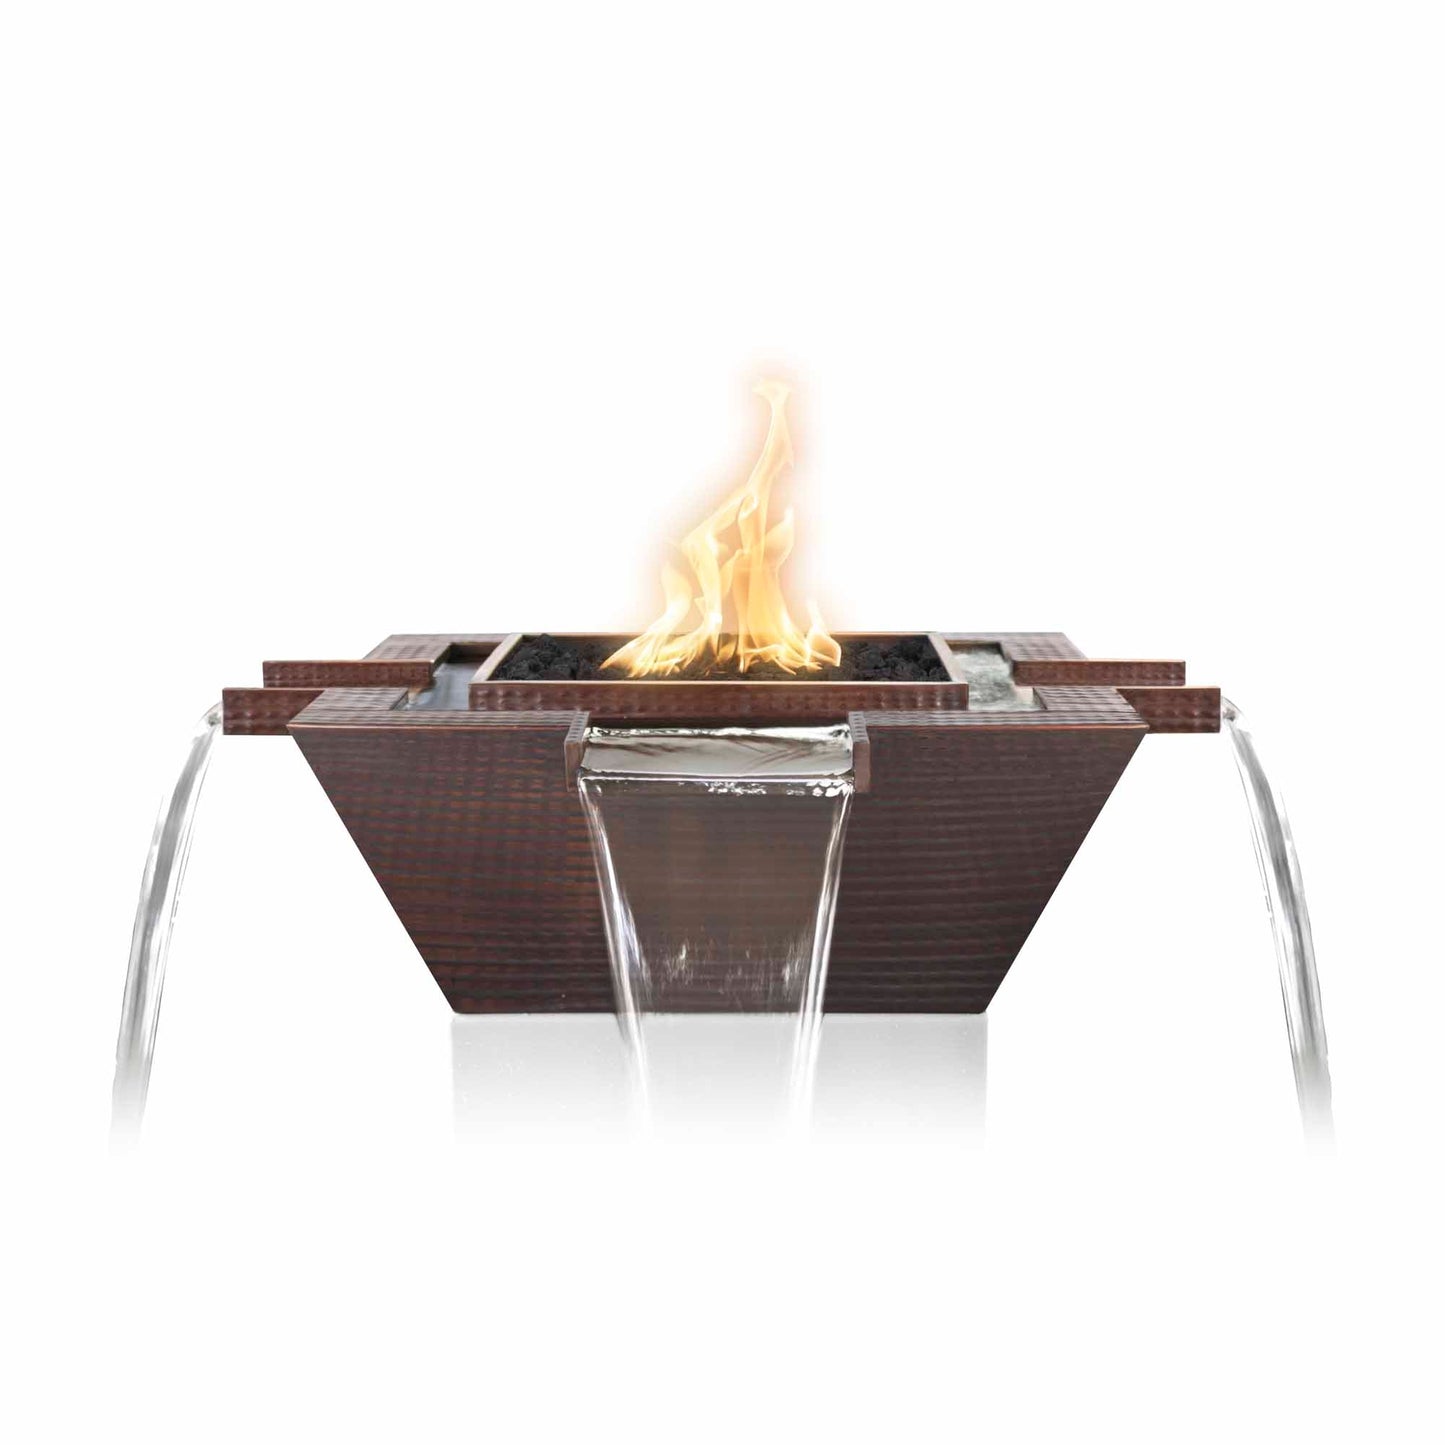 The Outdoor Plus Square Maya 36" Stainless Steel Liquid Propane Fire & Water Bowl 4-Way Spill with Match Lit Ignition